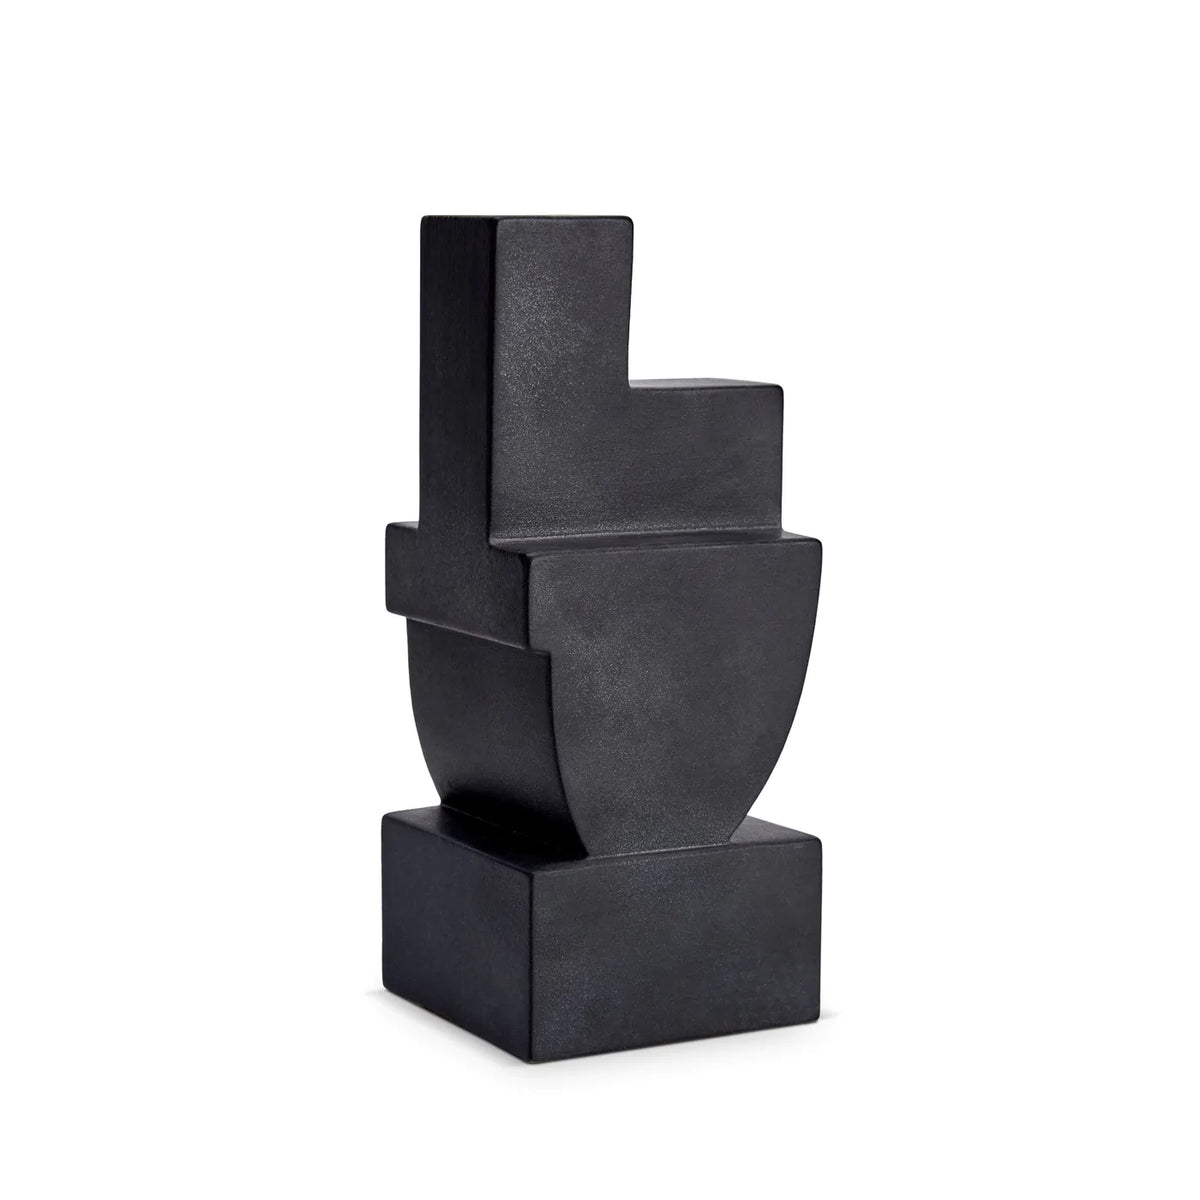 Cubsime Bookend